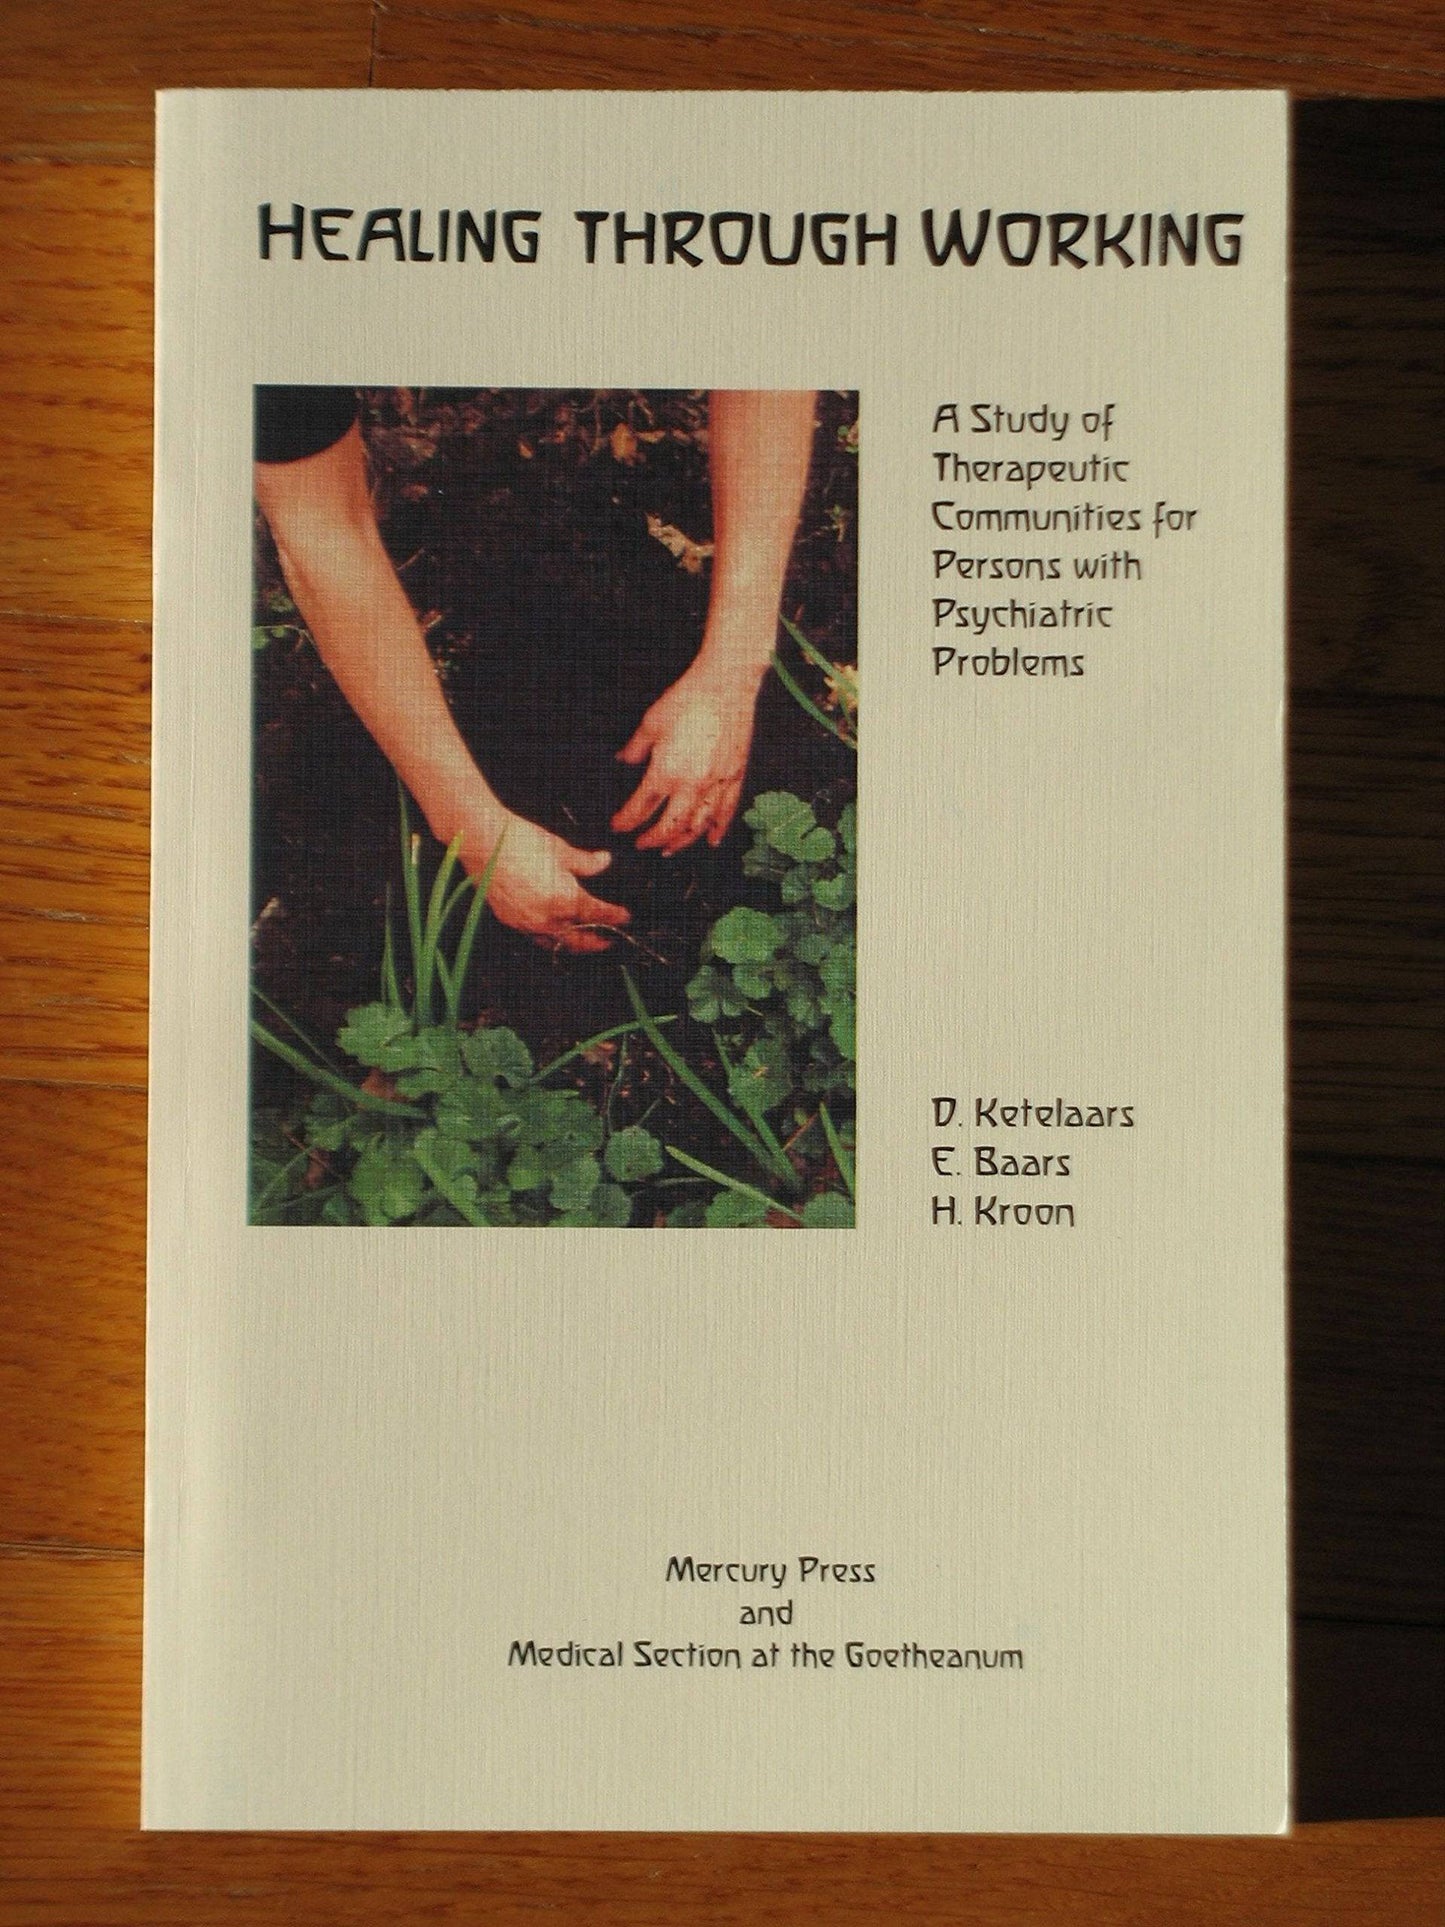 Healing Through Working: A Study of Therapeutic Communities for Persons with Psychiatric Problems by D. Ketelaars, E. Baars, H. Kroon - The Josephine Porter Institute